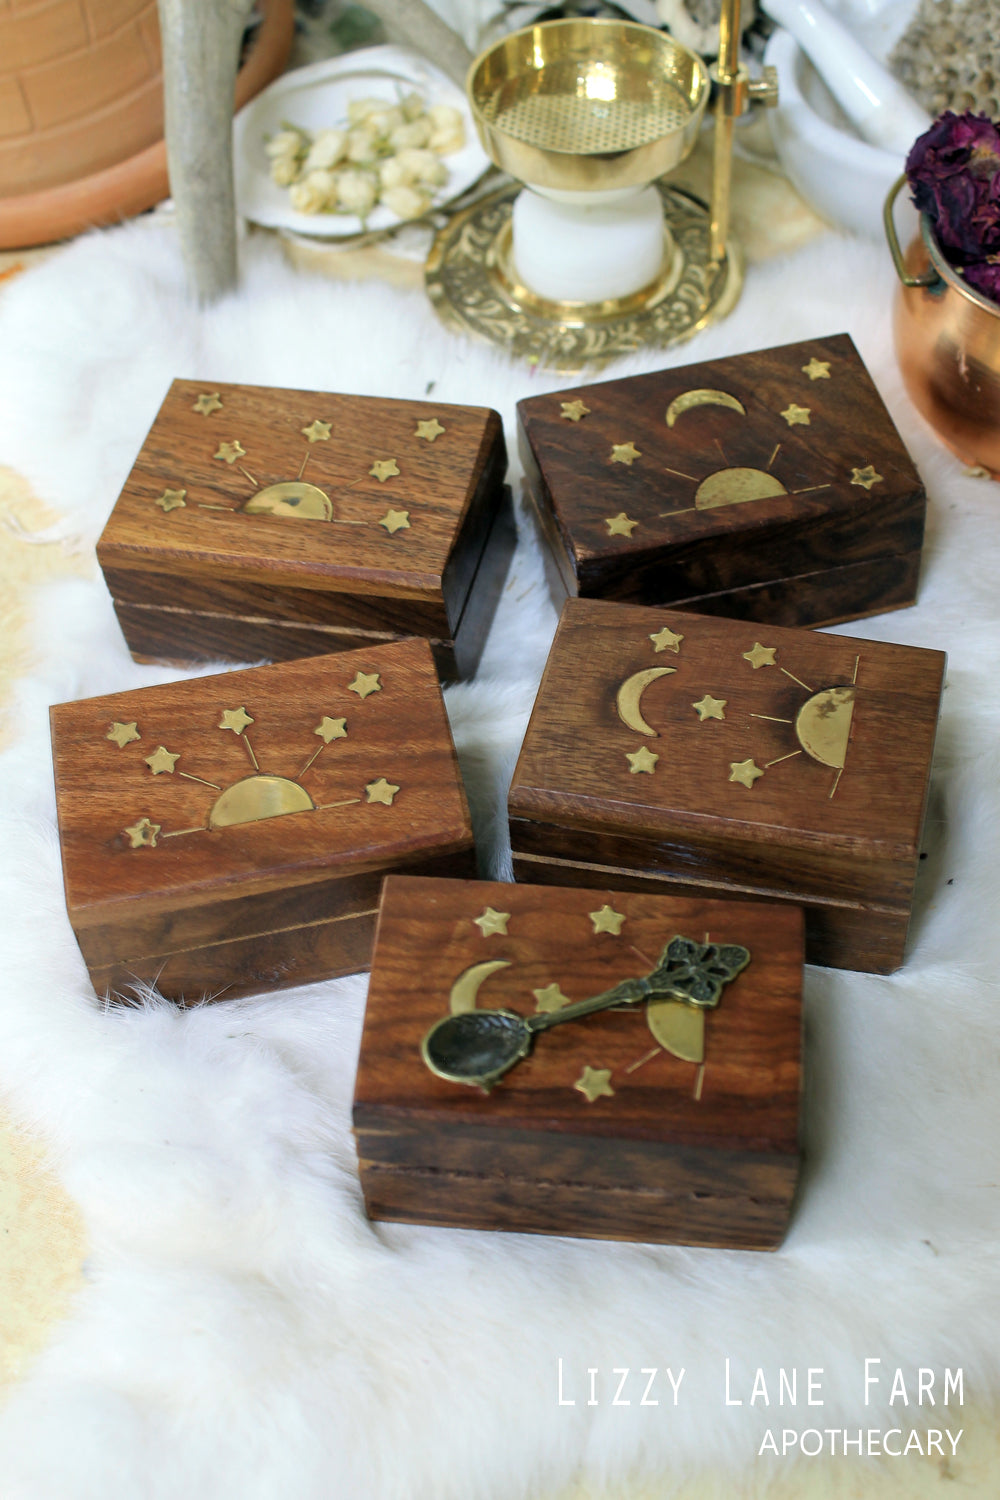 Black Styrax Resin In Wooden box-Peaceful vibrations, Sensual energy and to Protect against negativity.